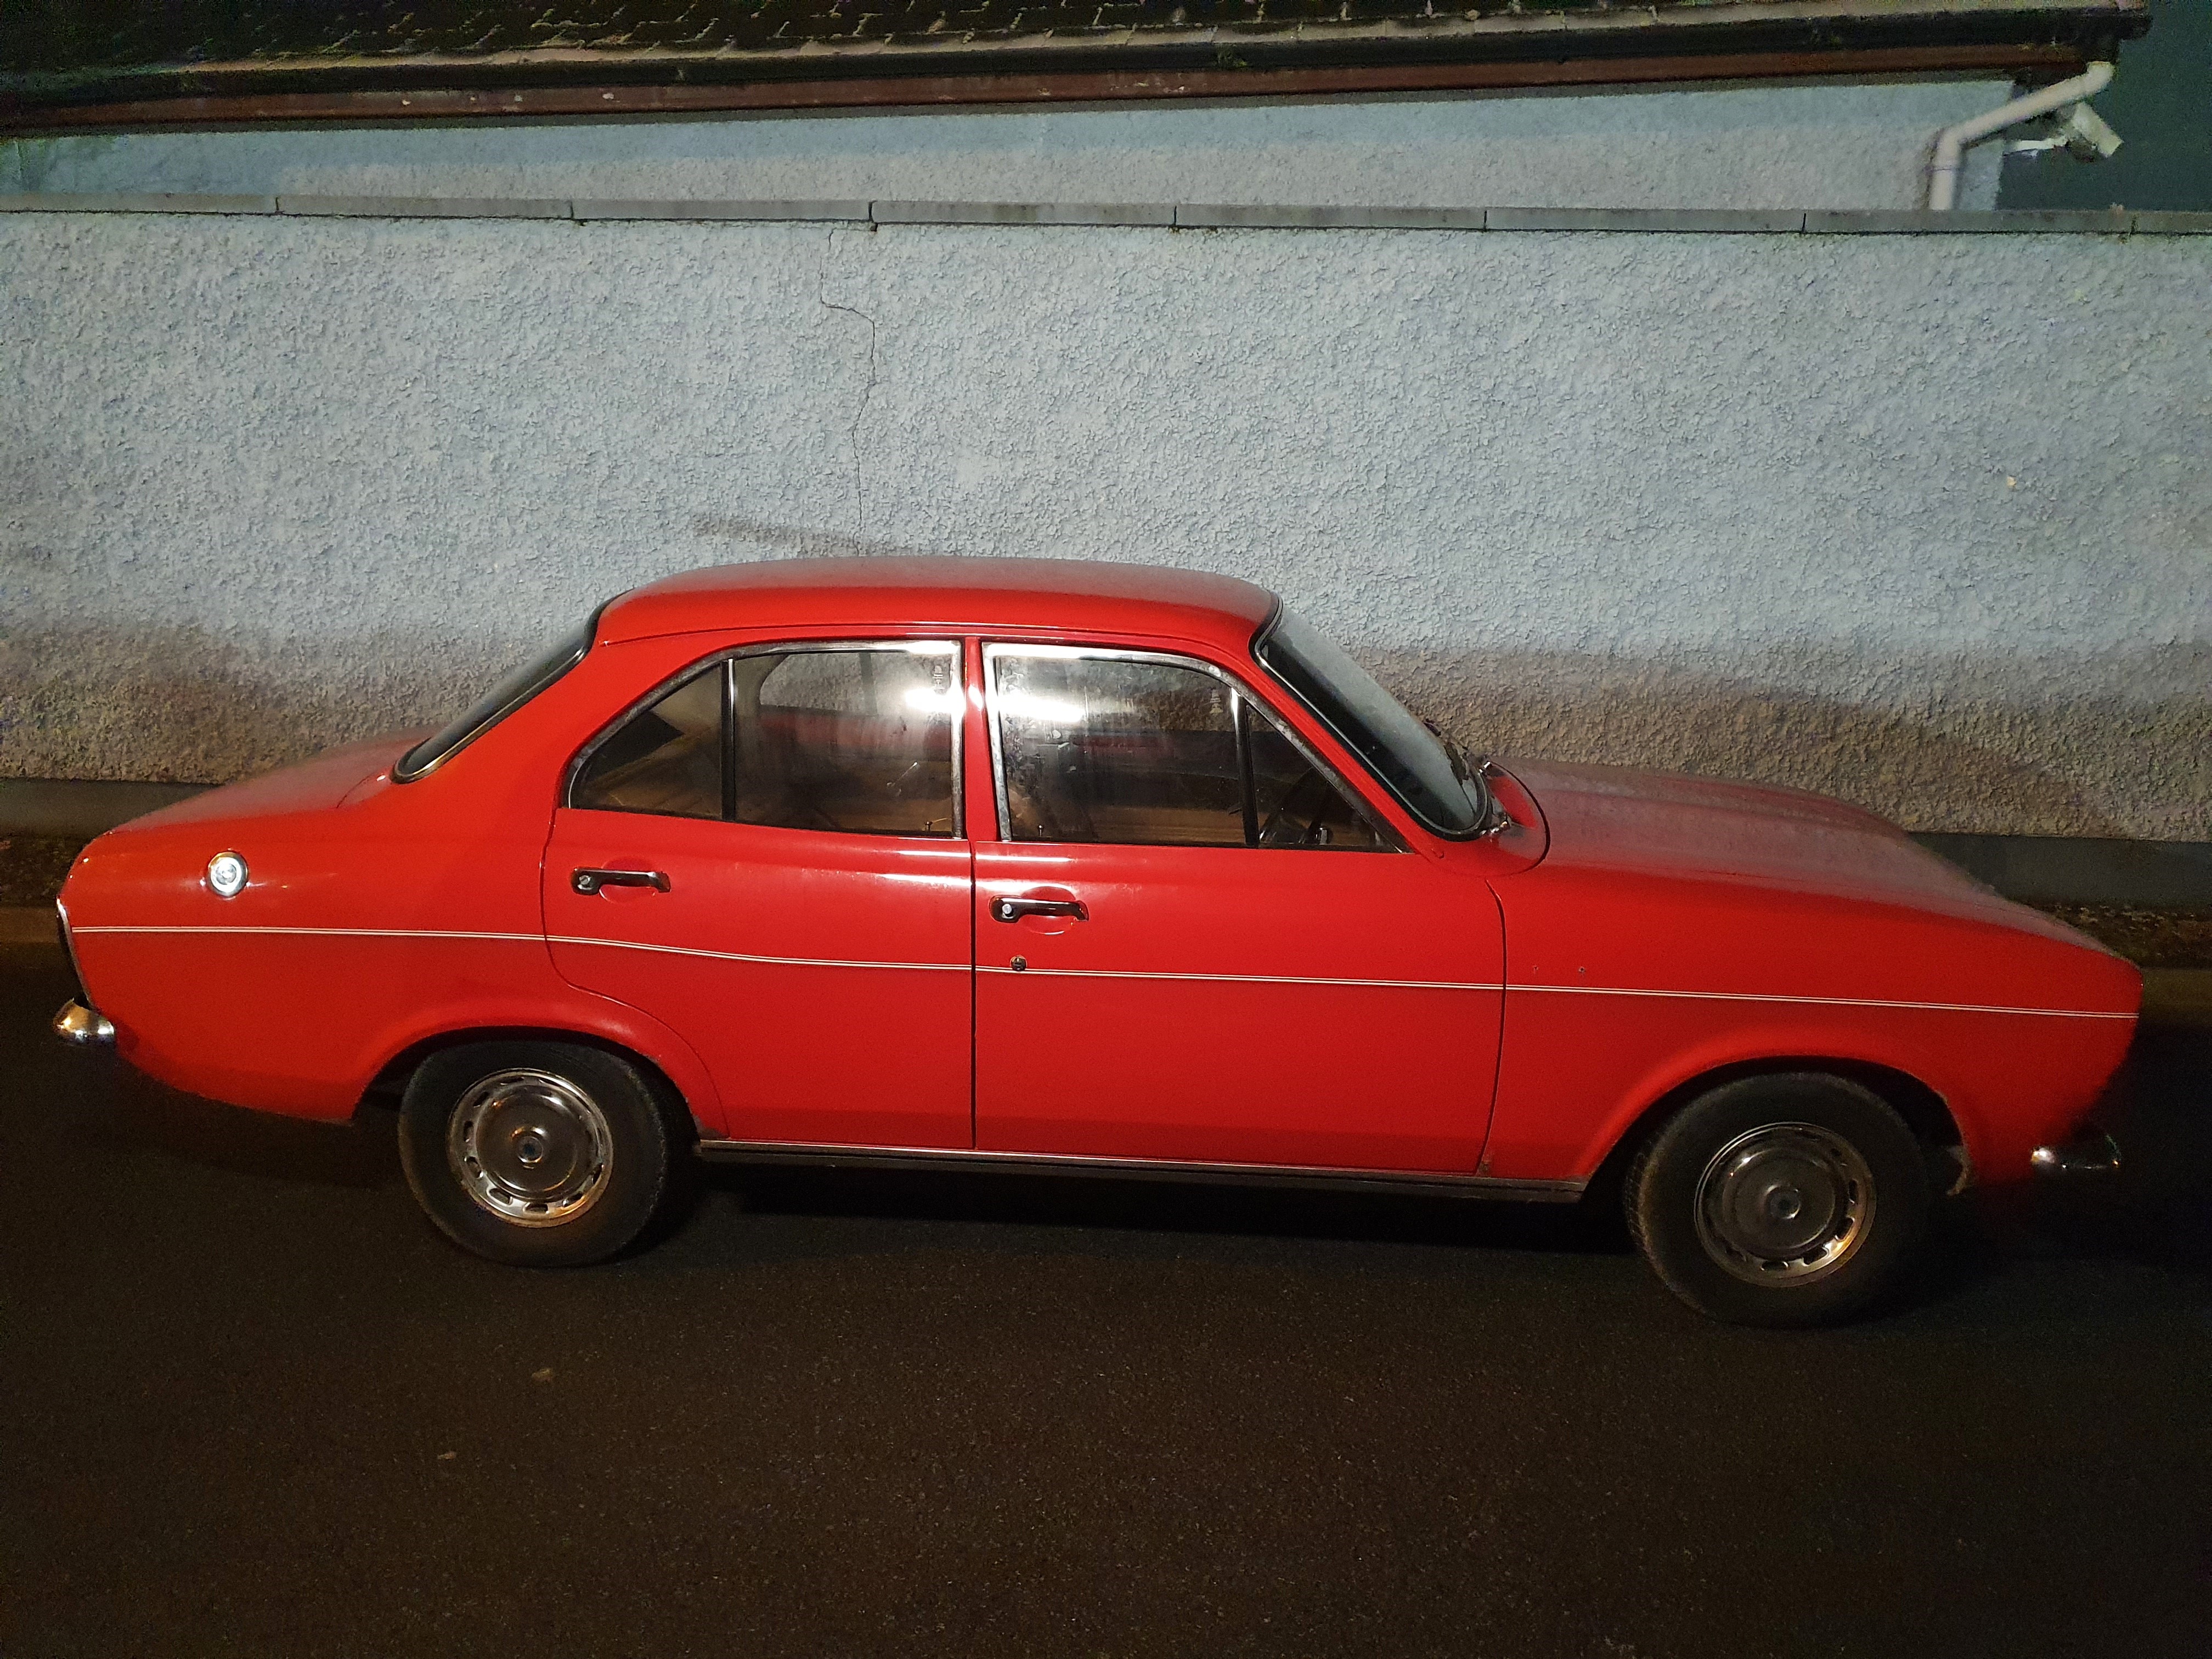 Red Ford Escort ()